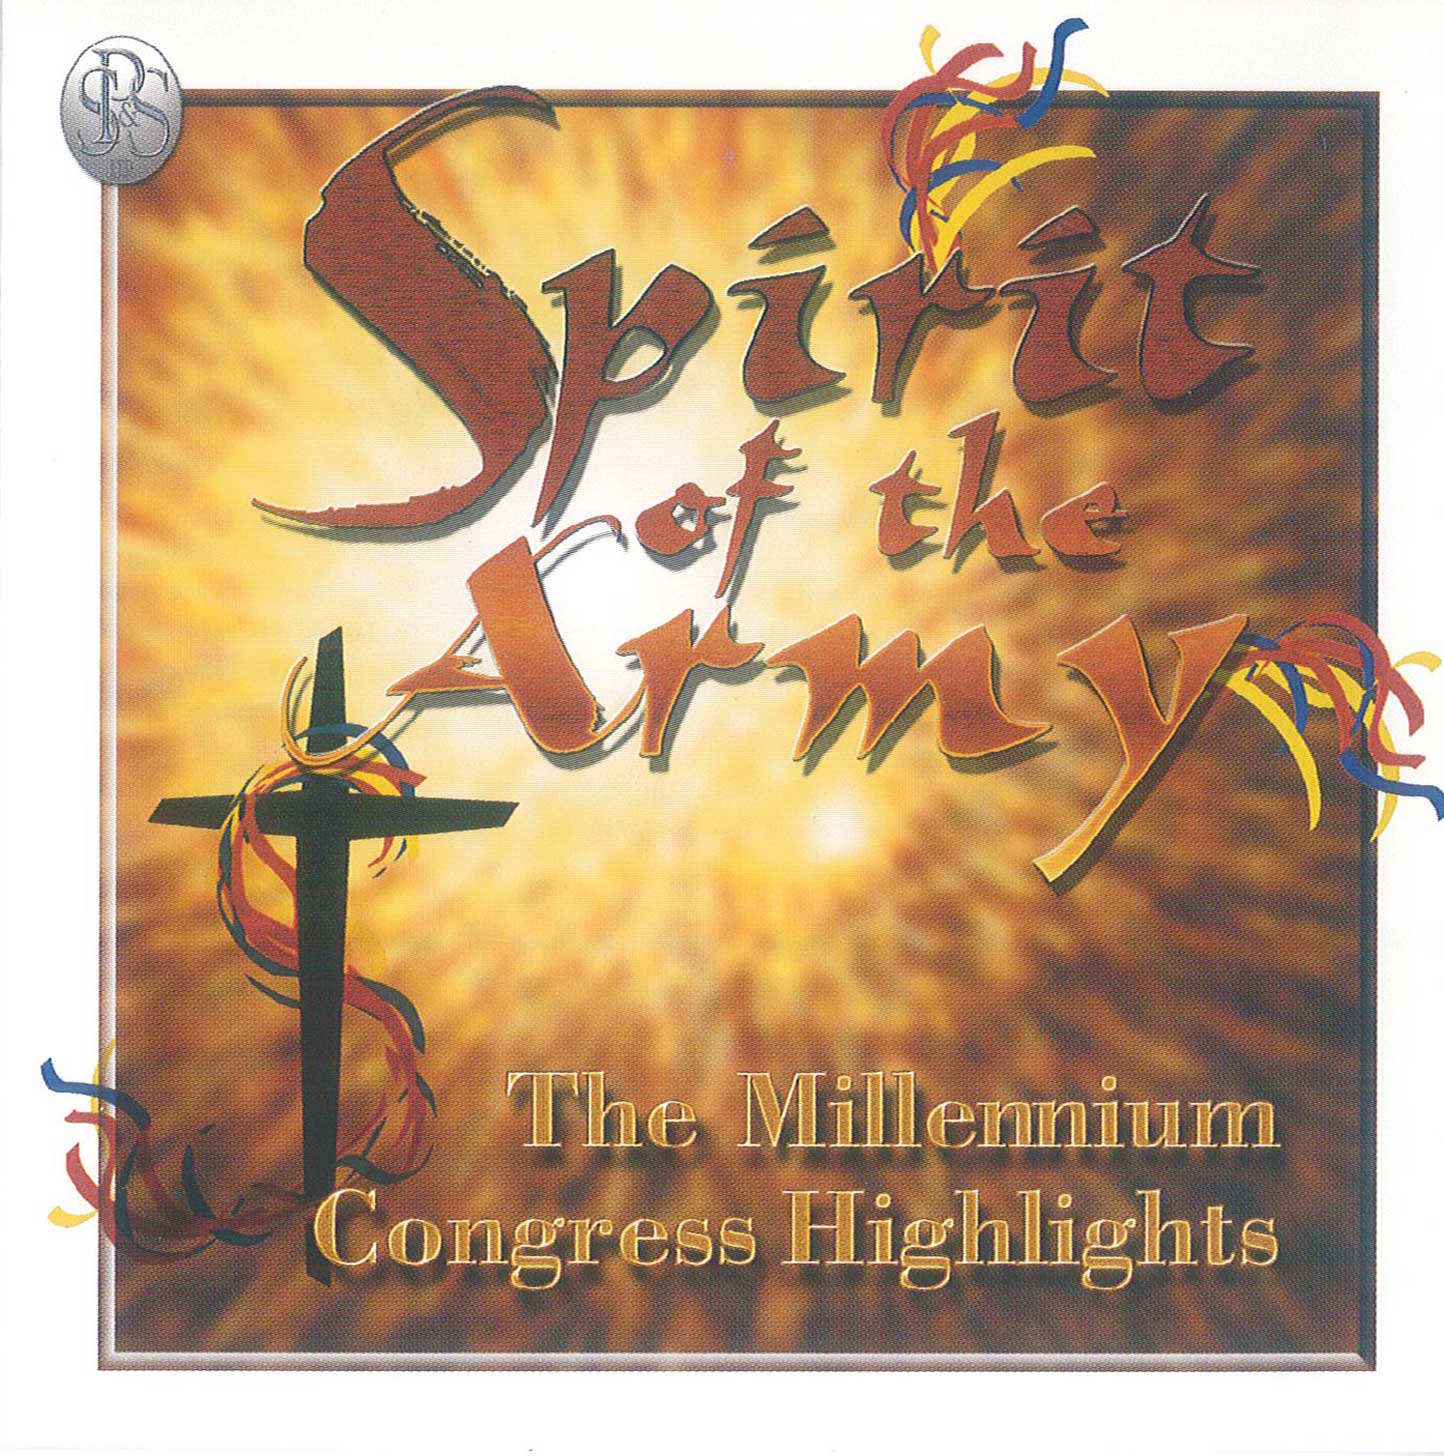 Spirit of the Army - Download